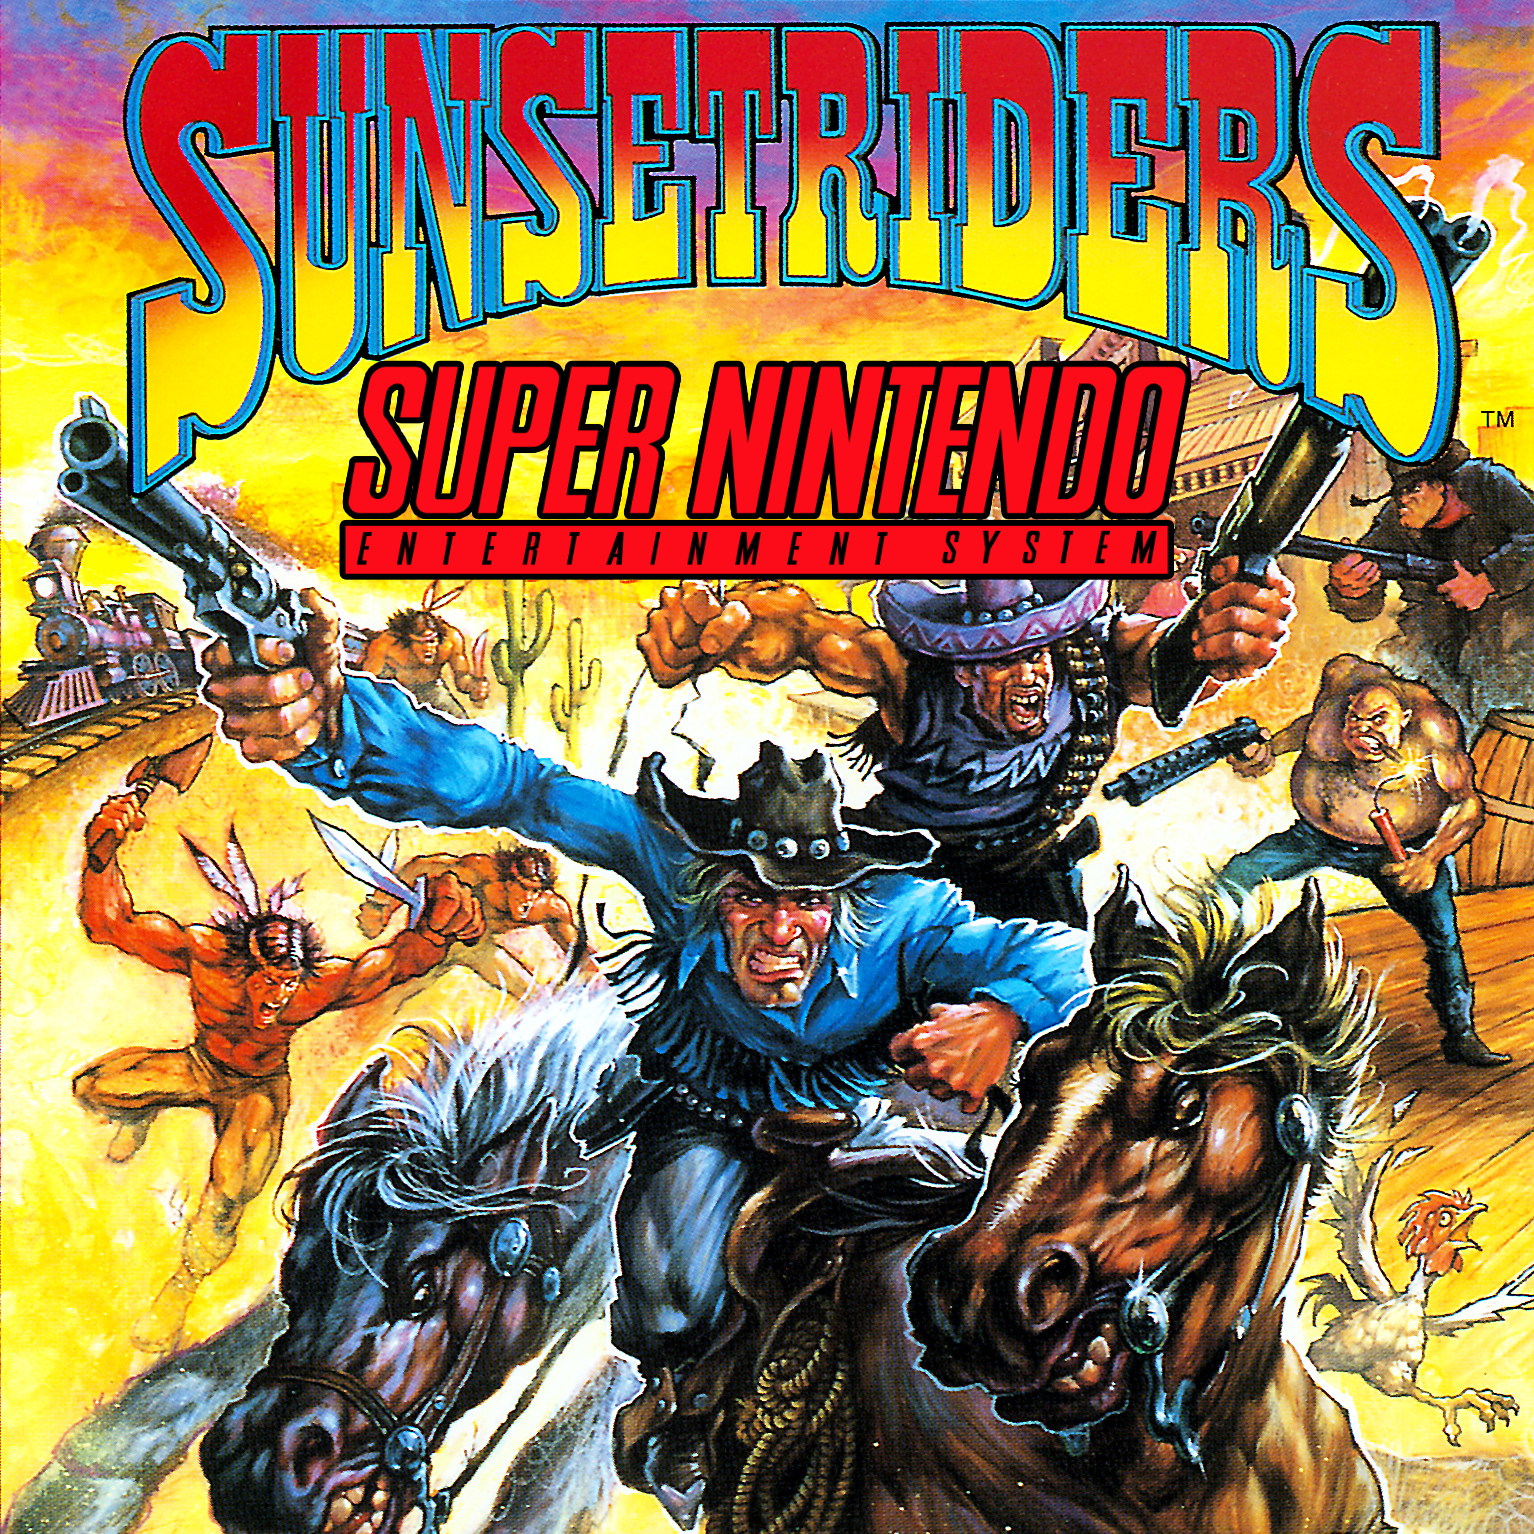 Sunset Riders (1993) (SNES) MP3 Sunset Riders (1993) (SNES) Soundtracks for FREE!